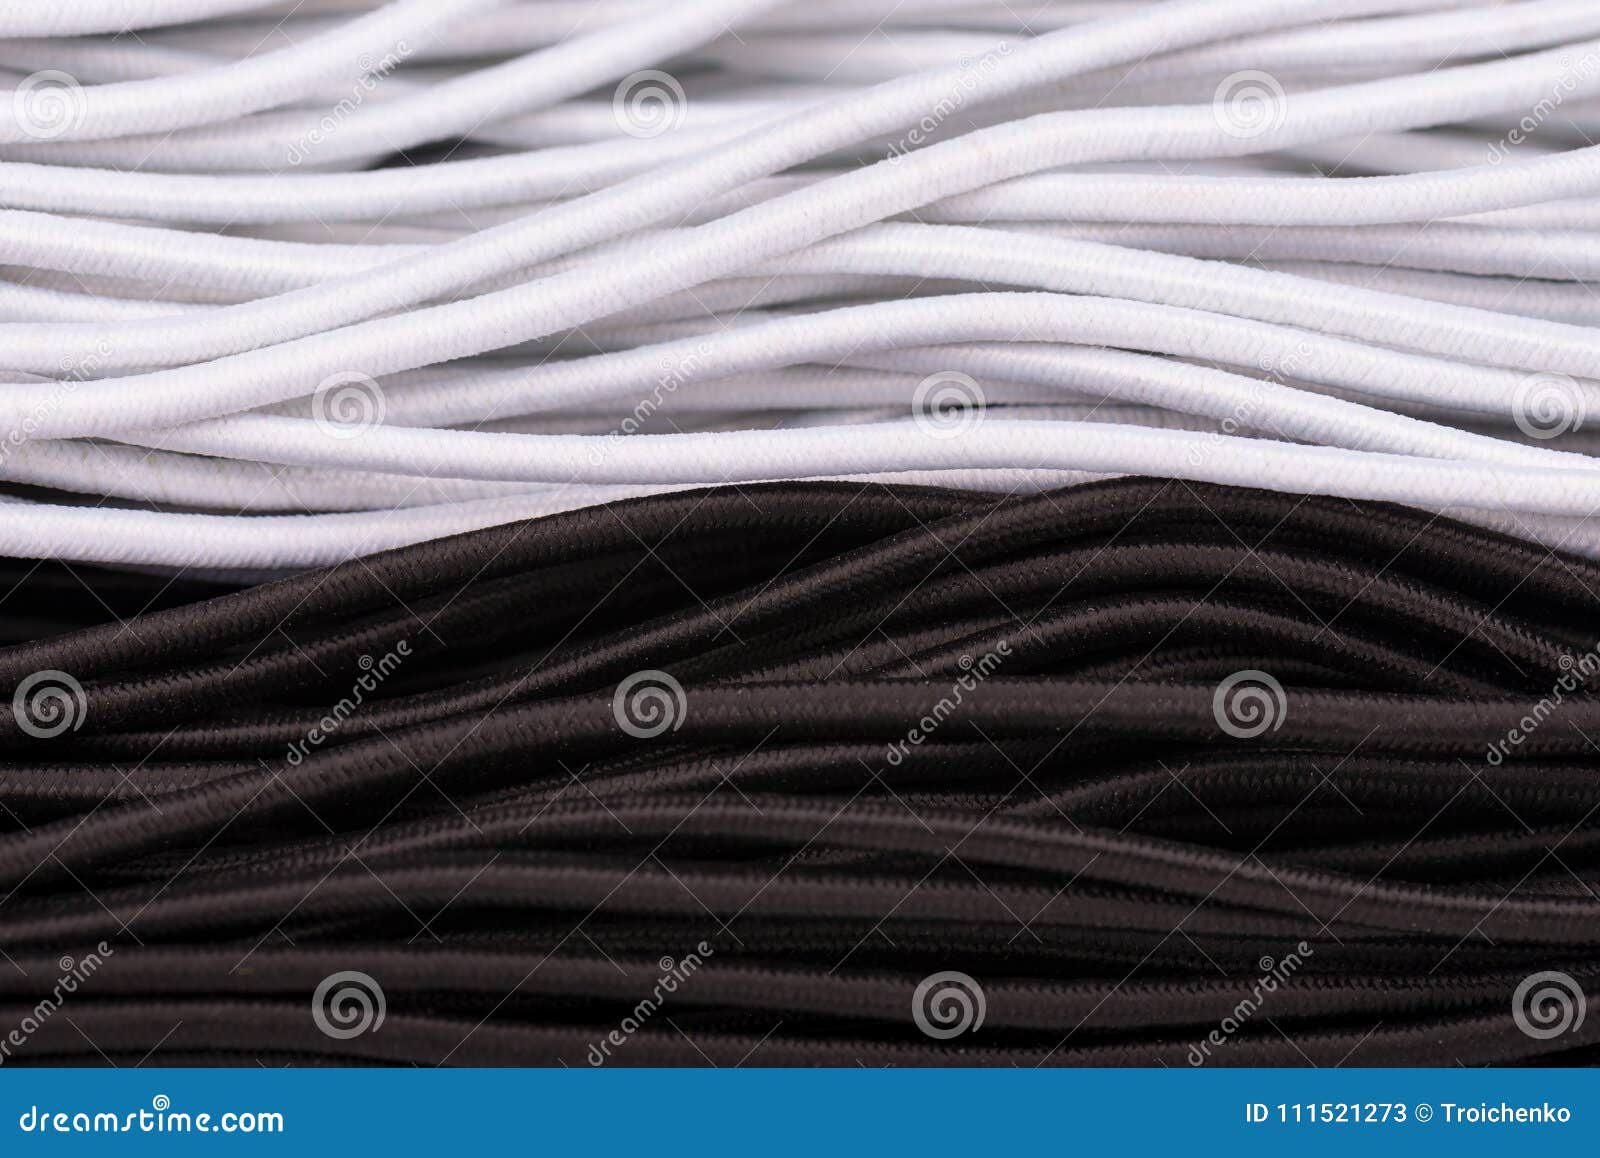 Rubber Band for Sewing Clothes. Sewing Elastic Band Stock Image - Image of  housework, fabric: 111521273